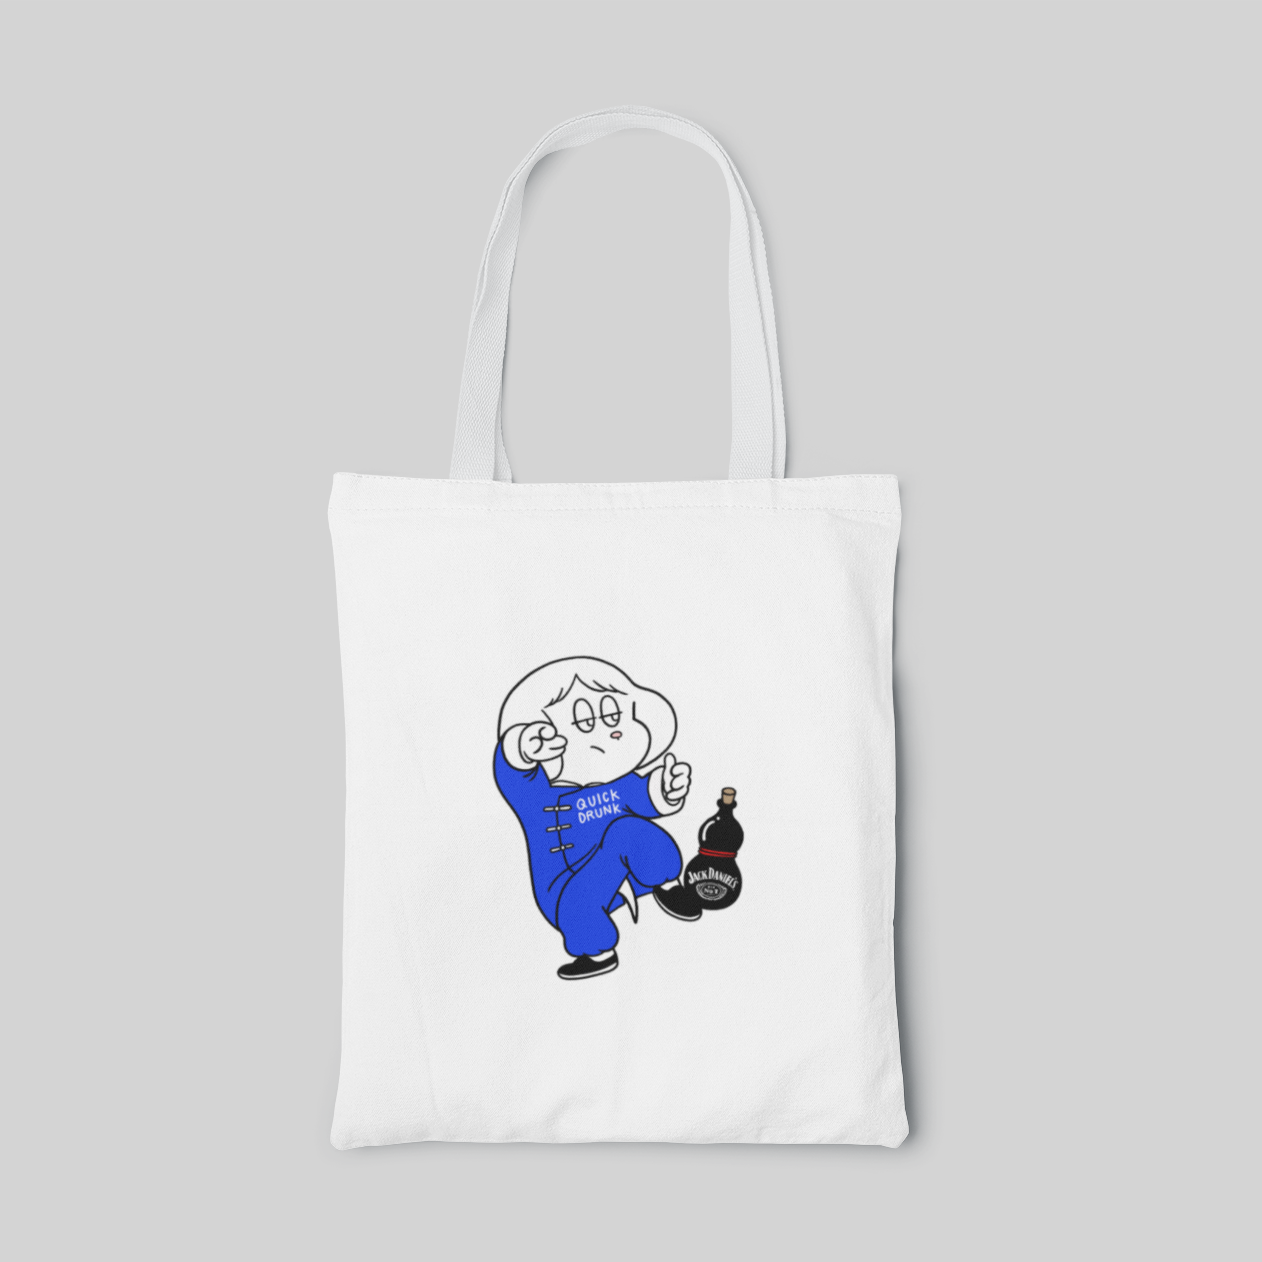 White lowbrow designed tote bag with girl wearing blue martial arts clothing and holding a bottle of whisky on her leg, front side